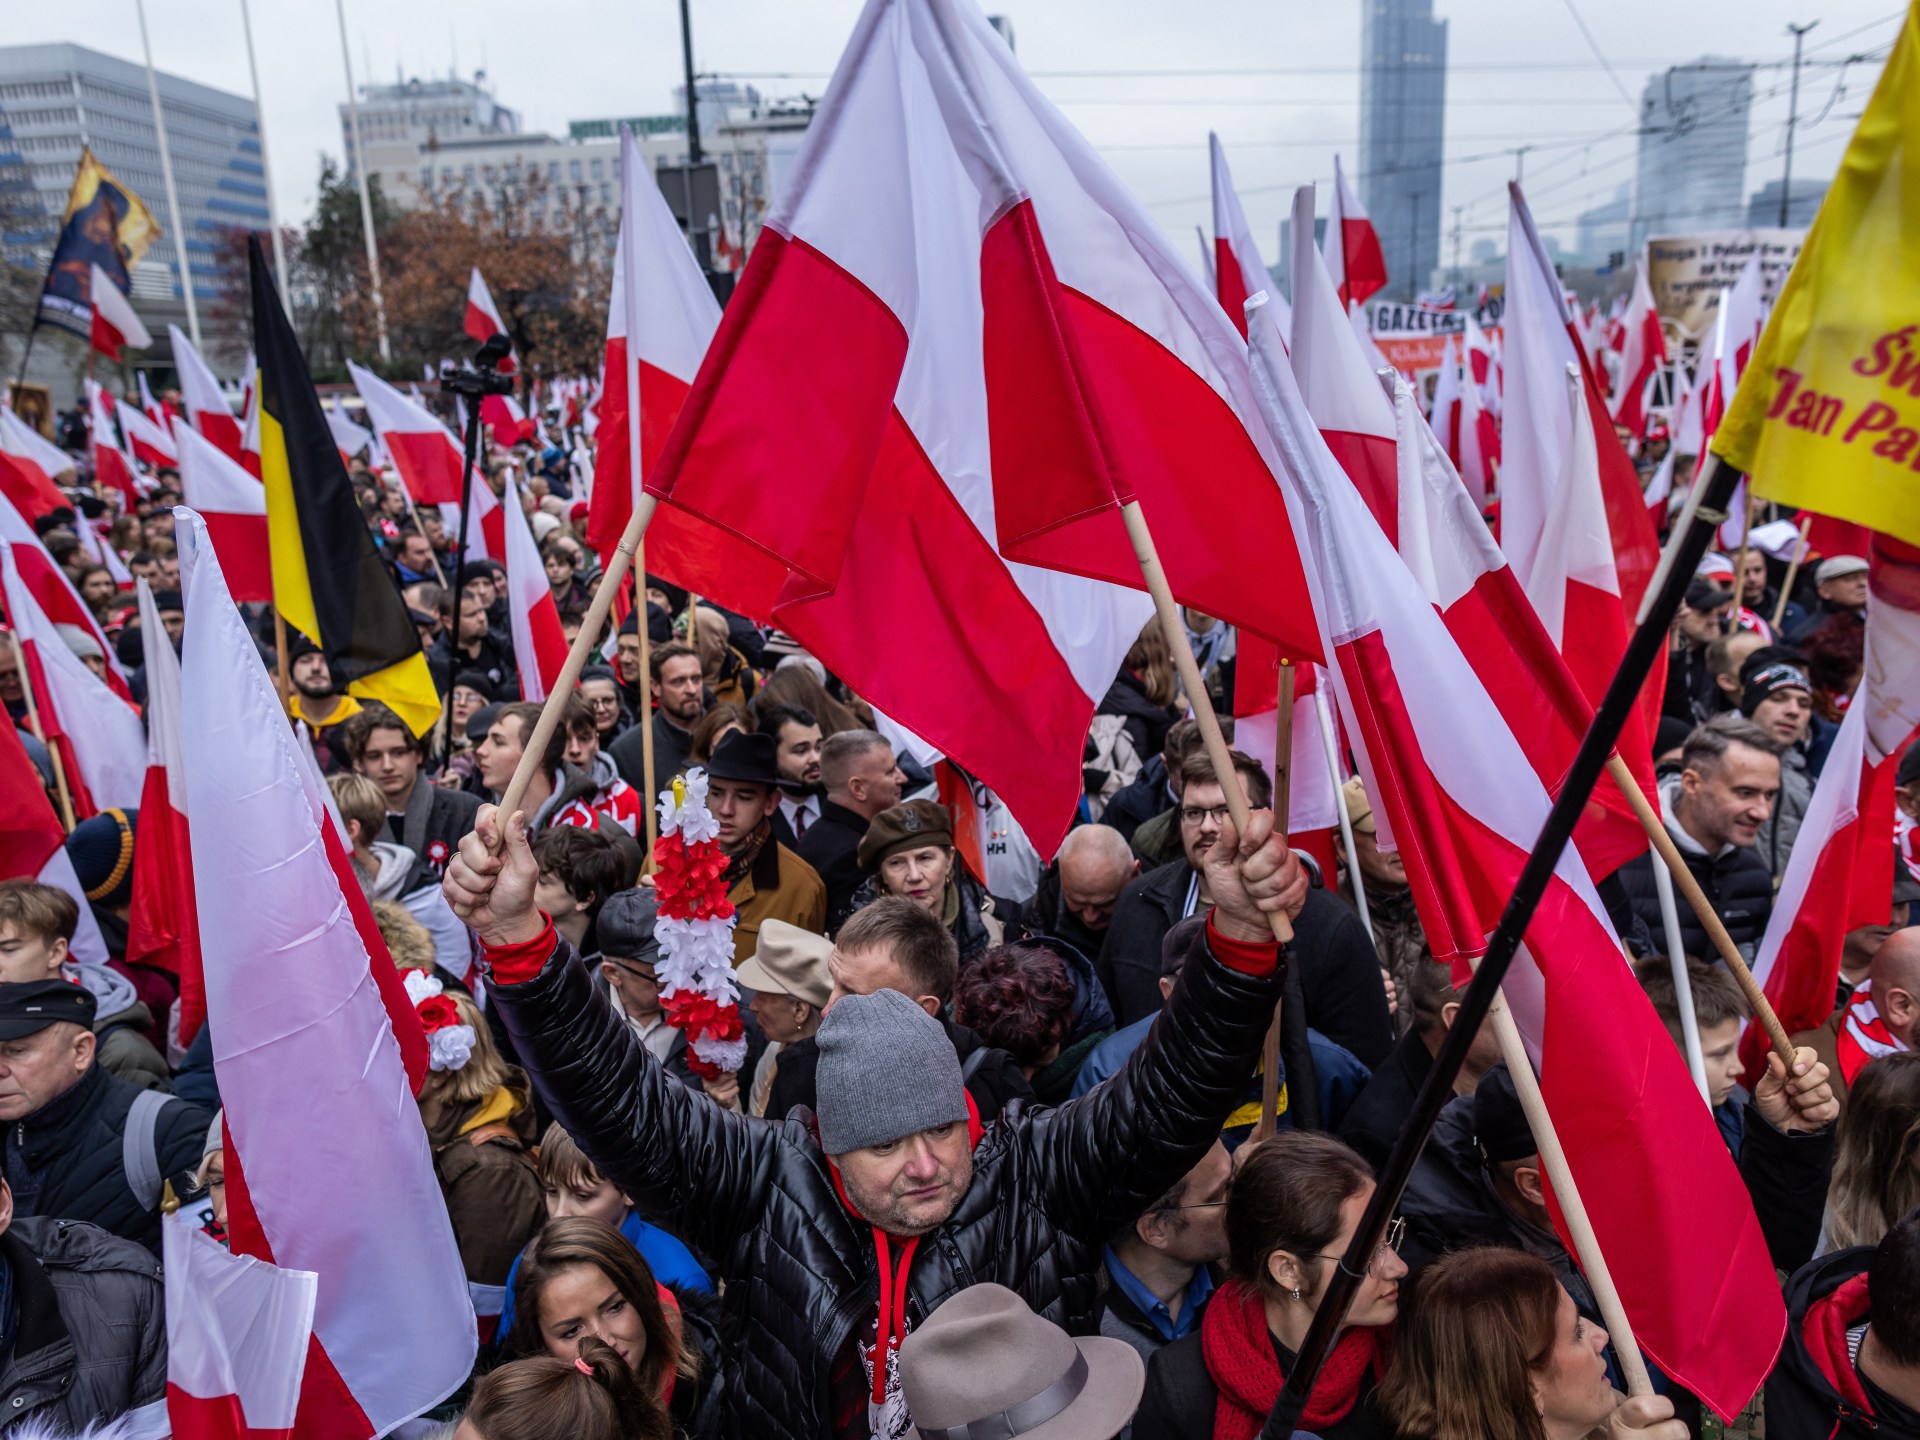 Poland’s nationalist ‘independence march’ draws thousands in Warsaw |  The right-wing extremist news